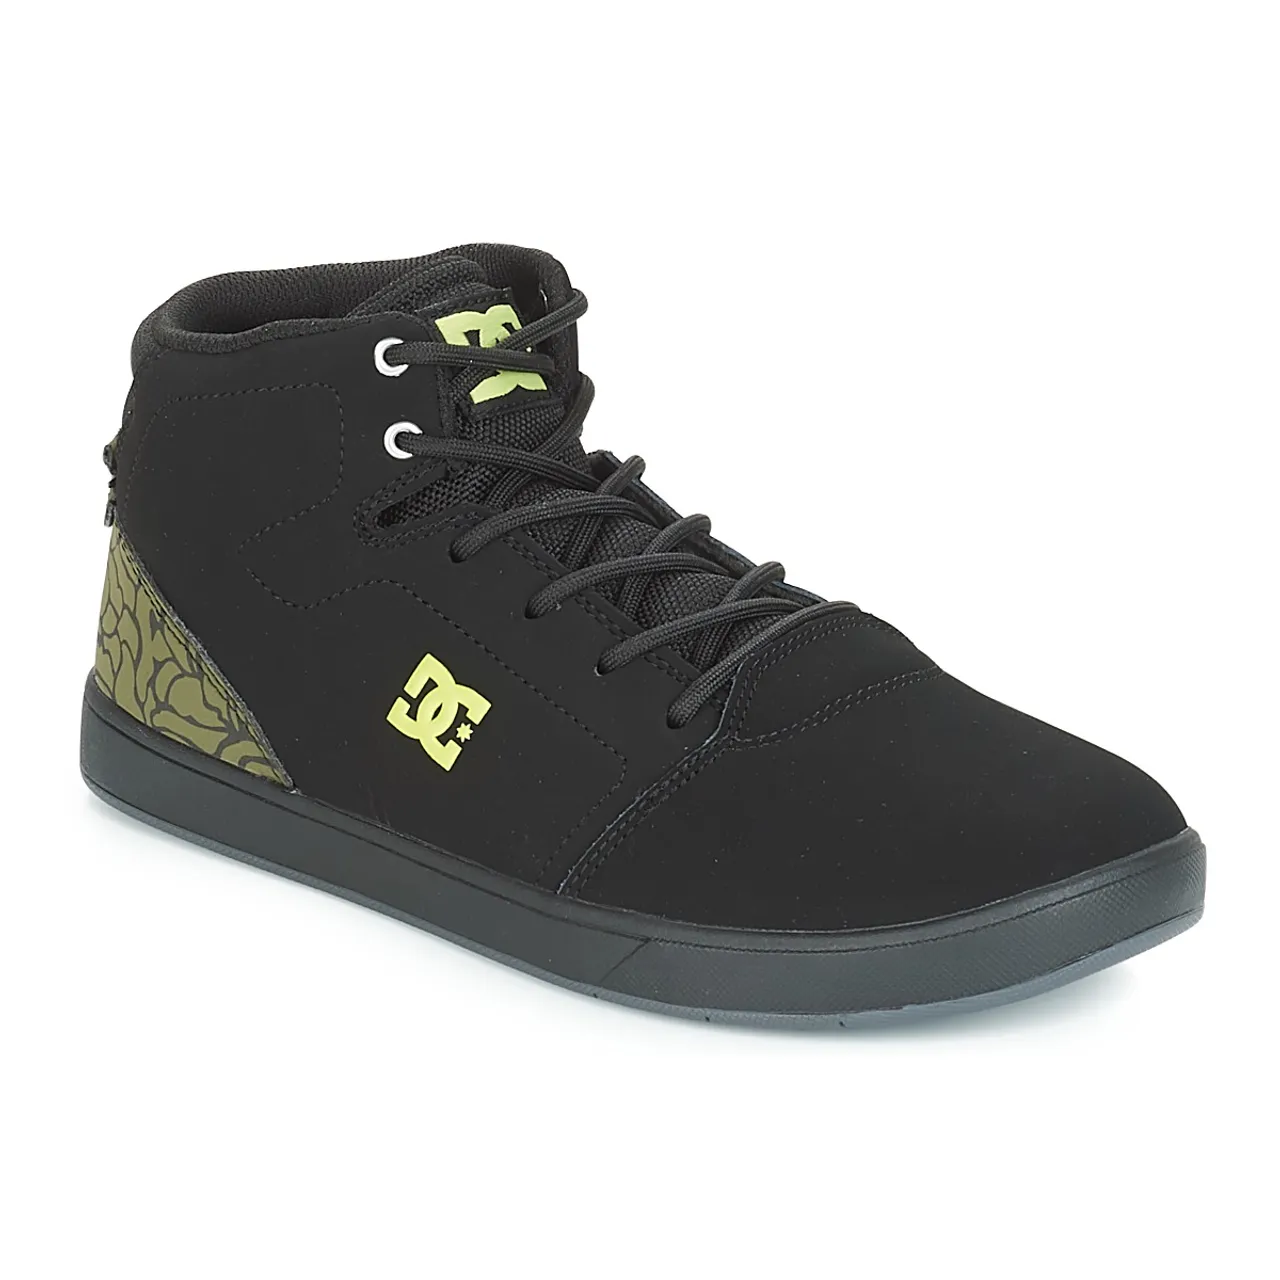 DC Shoes  CRISIS HIGH SE B SHOE BK9  boys's Children's Shoes (High-top Trainers) in Black